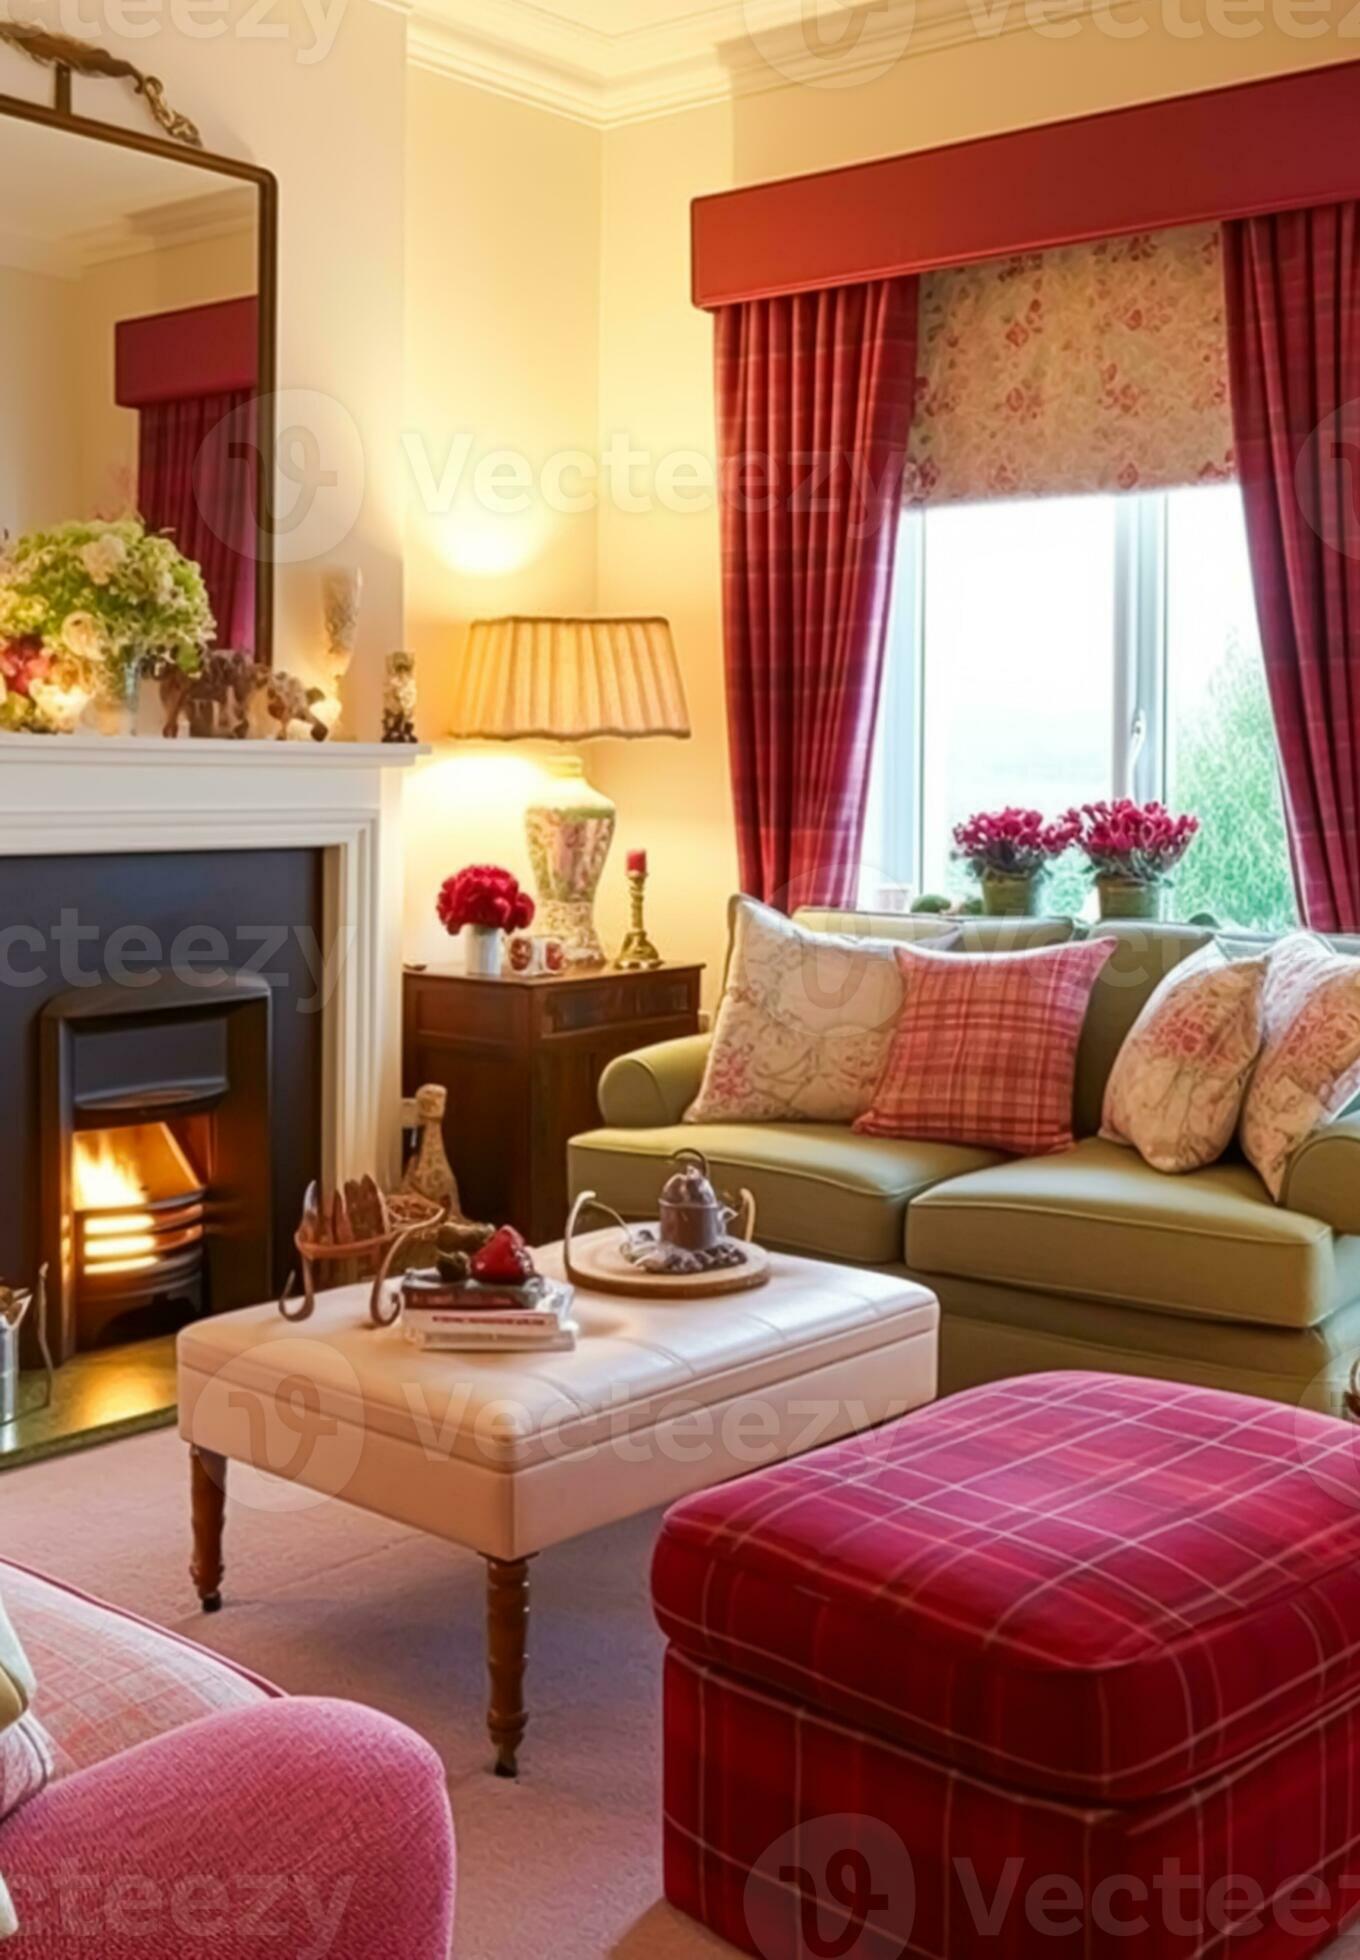 Traditional sitting room decor, interior design, red pink living